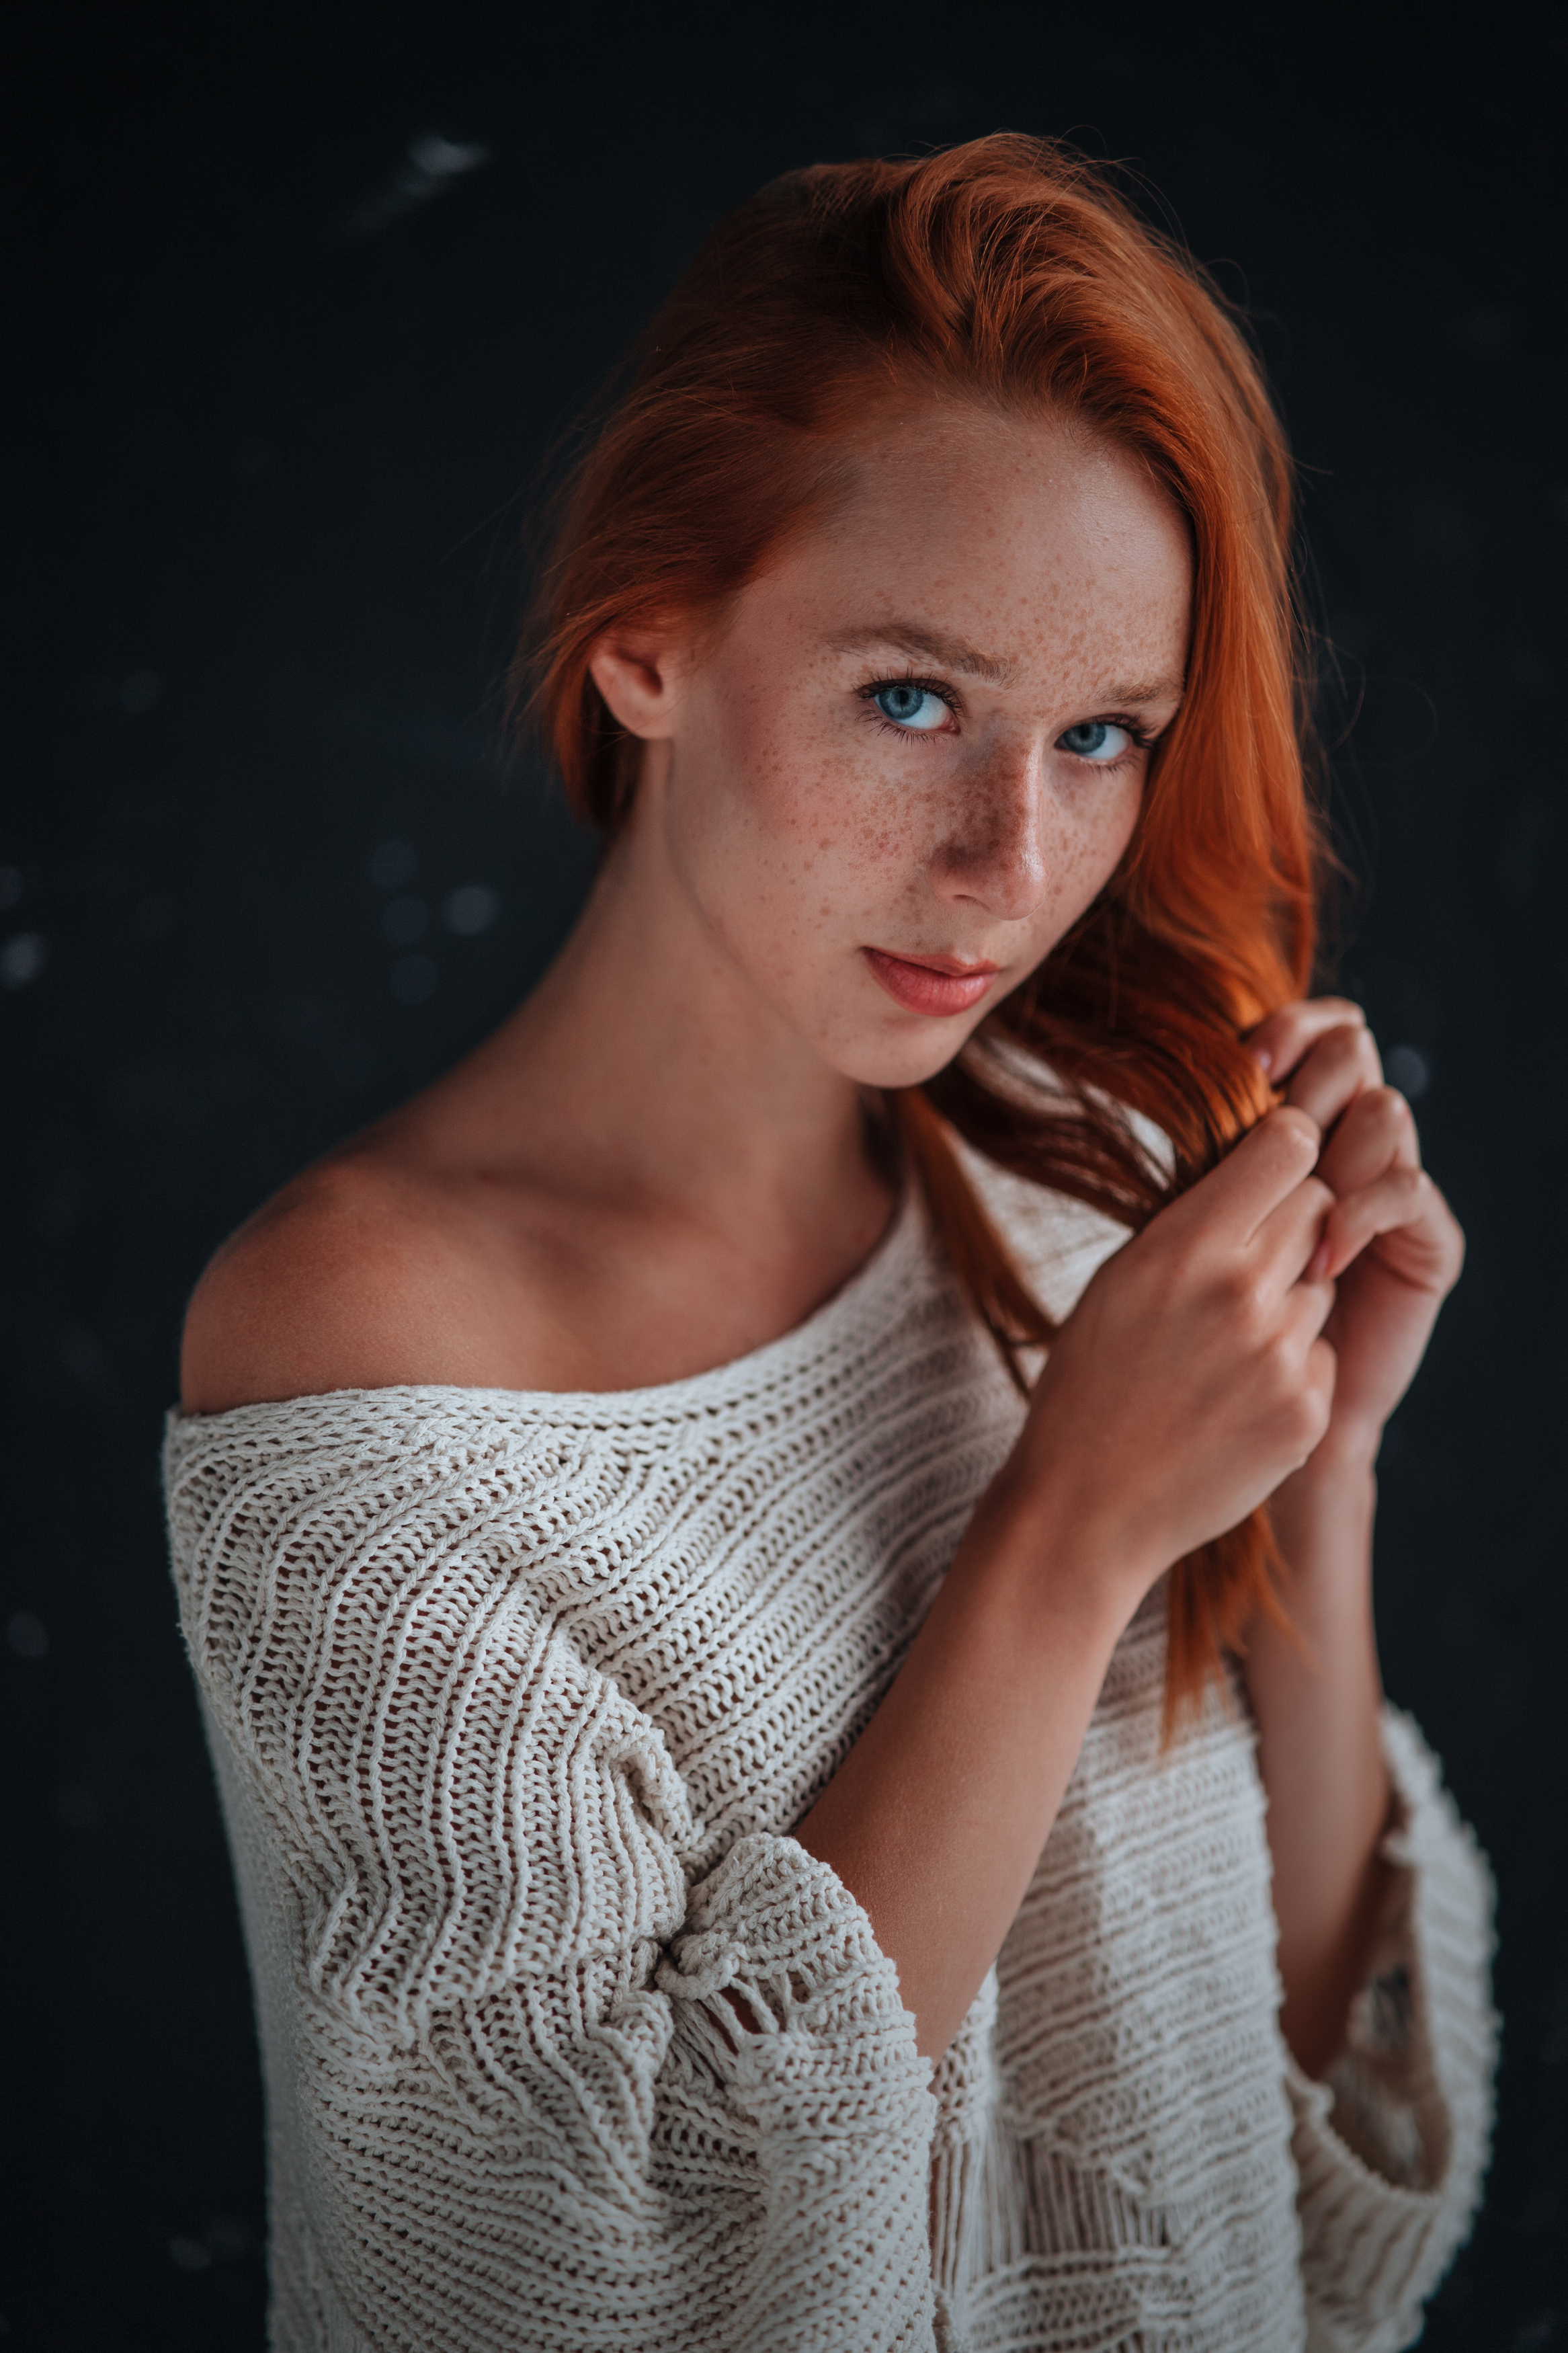 Andrei Blackwood Women Portrait Redhead Freckles Knit Fabric One Bare Shoulder Model Hands In Hair P 2333x3500